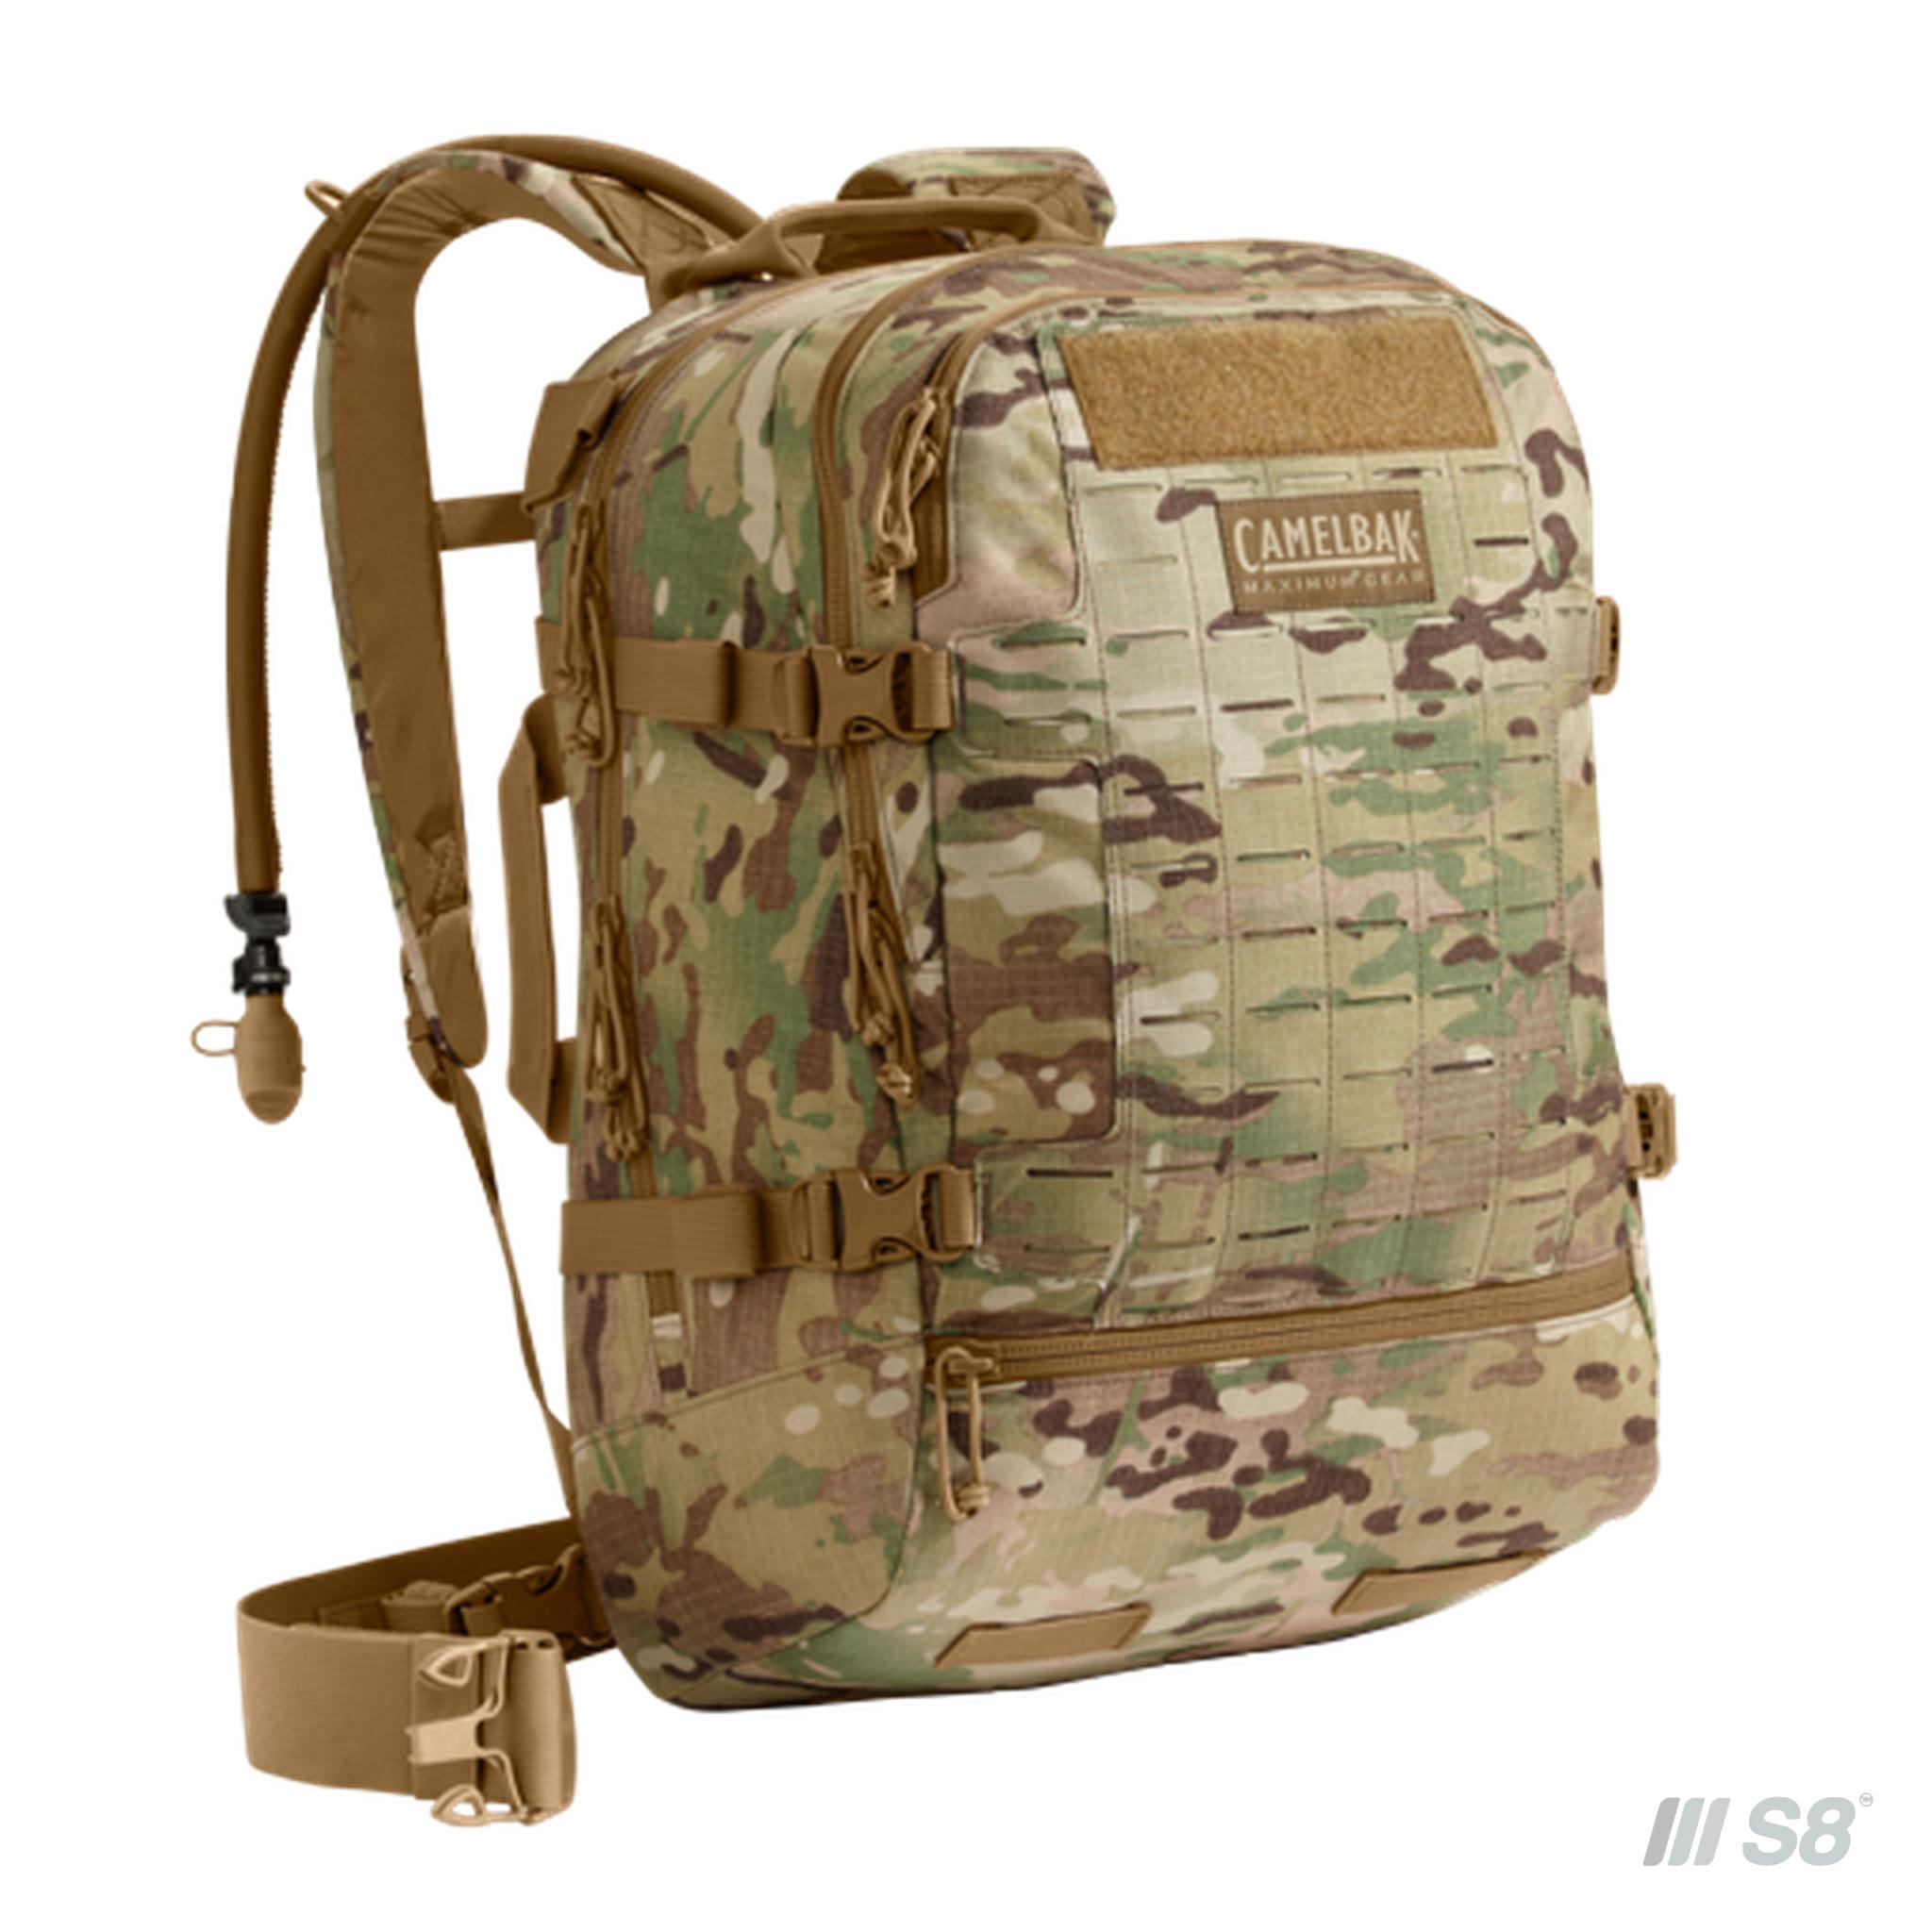 Skirmish䋢-Camelbak-S8 Products Group